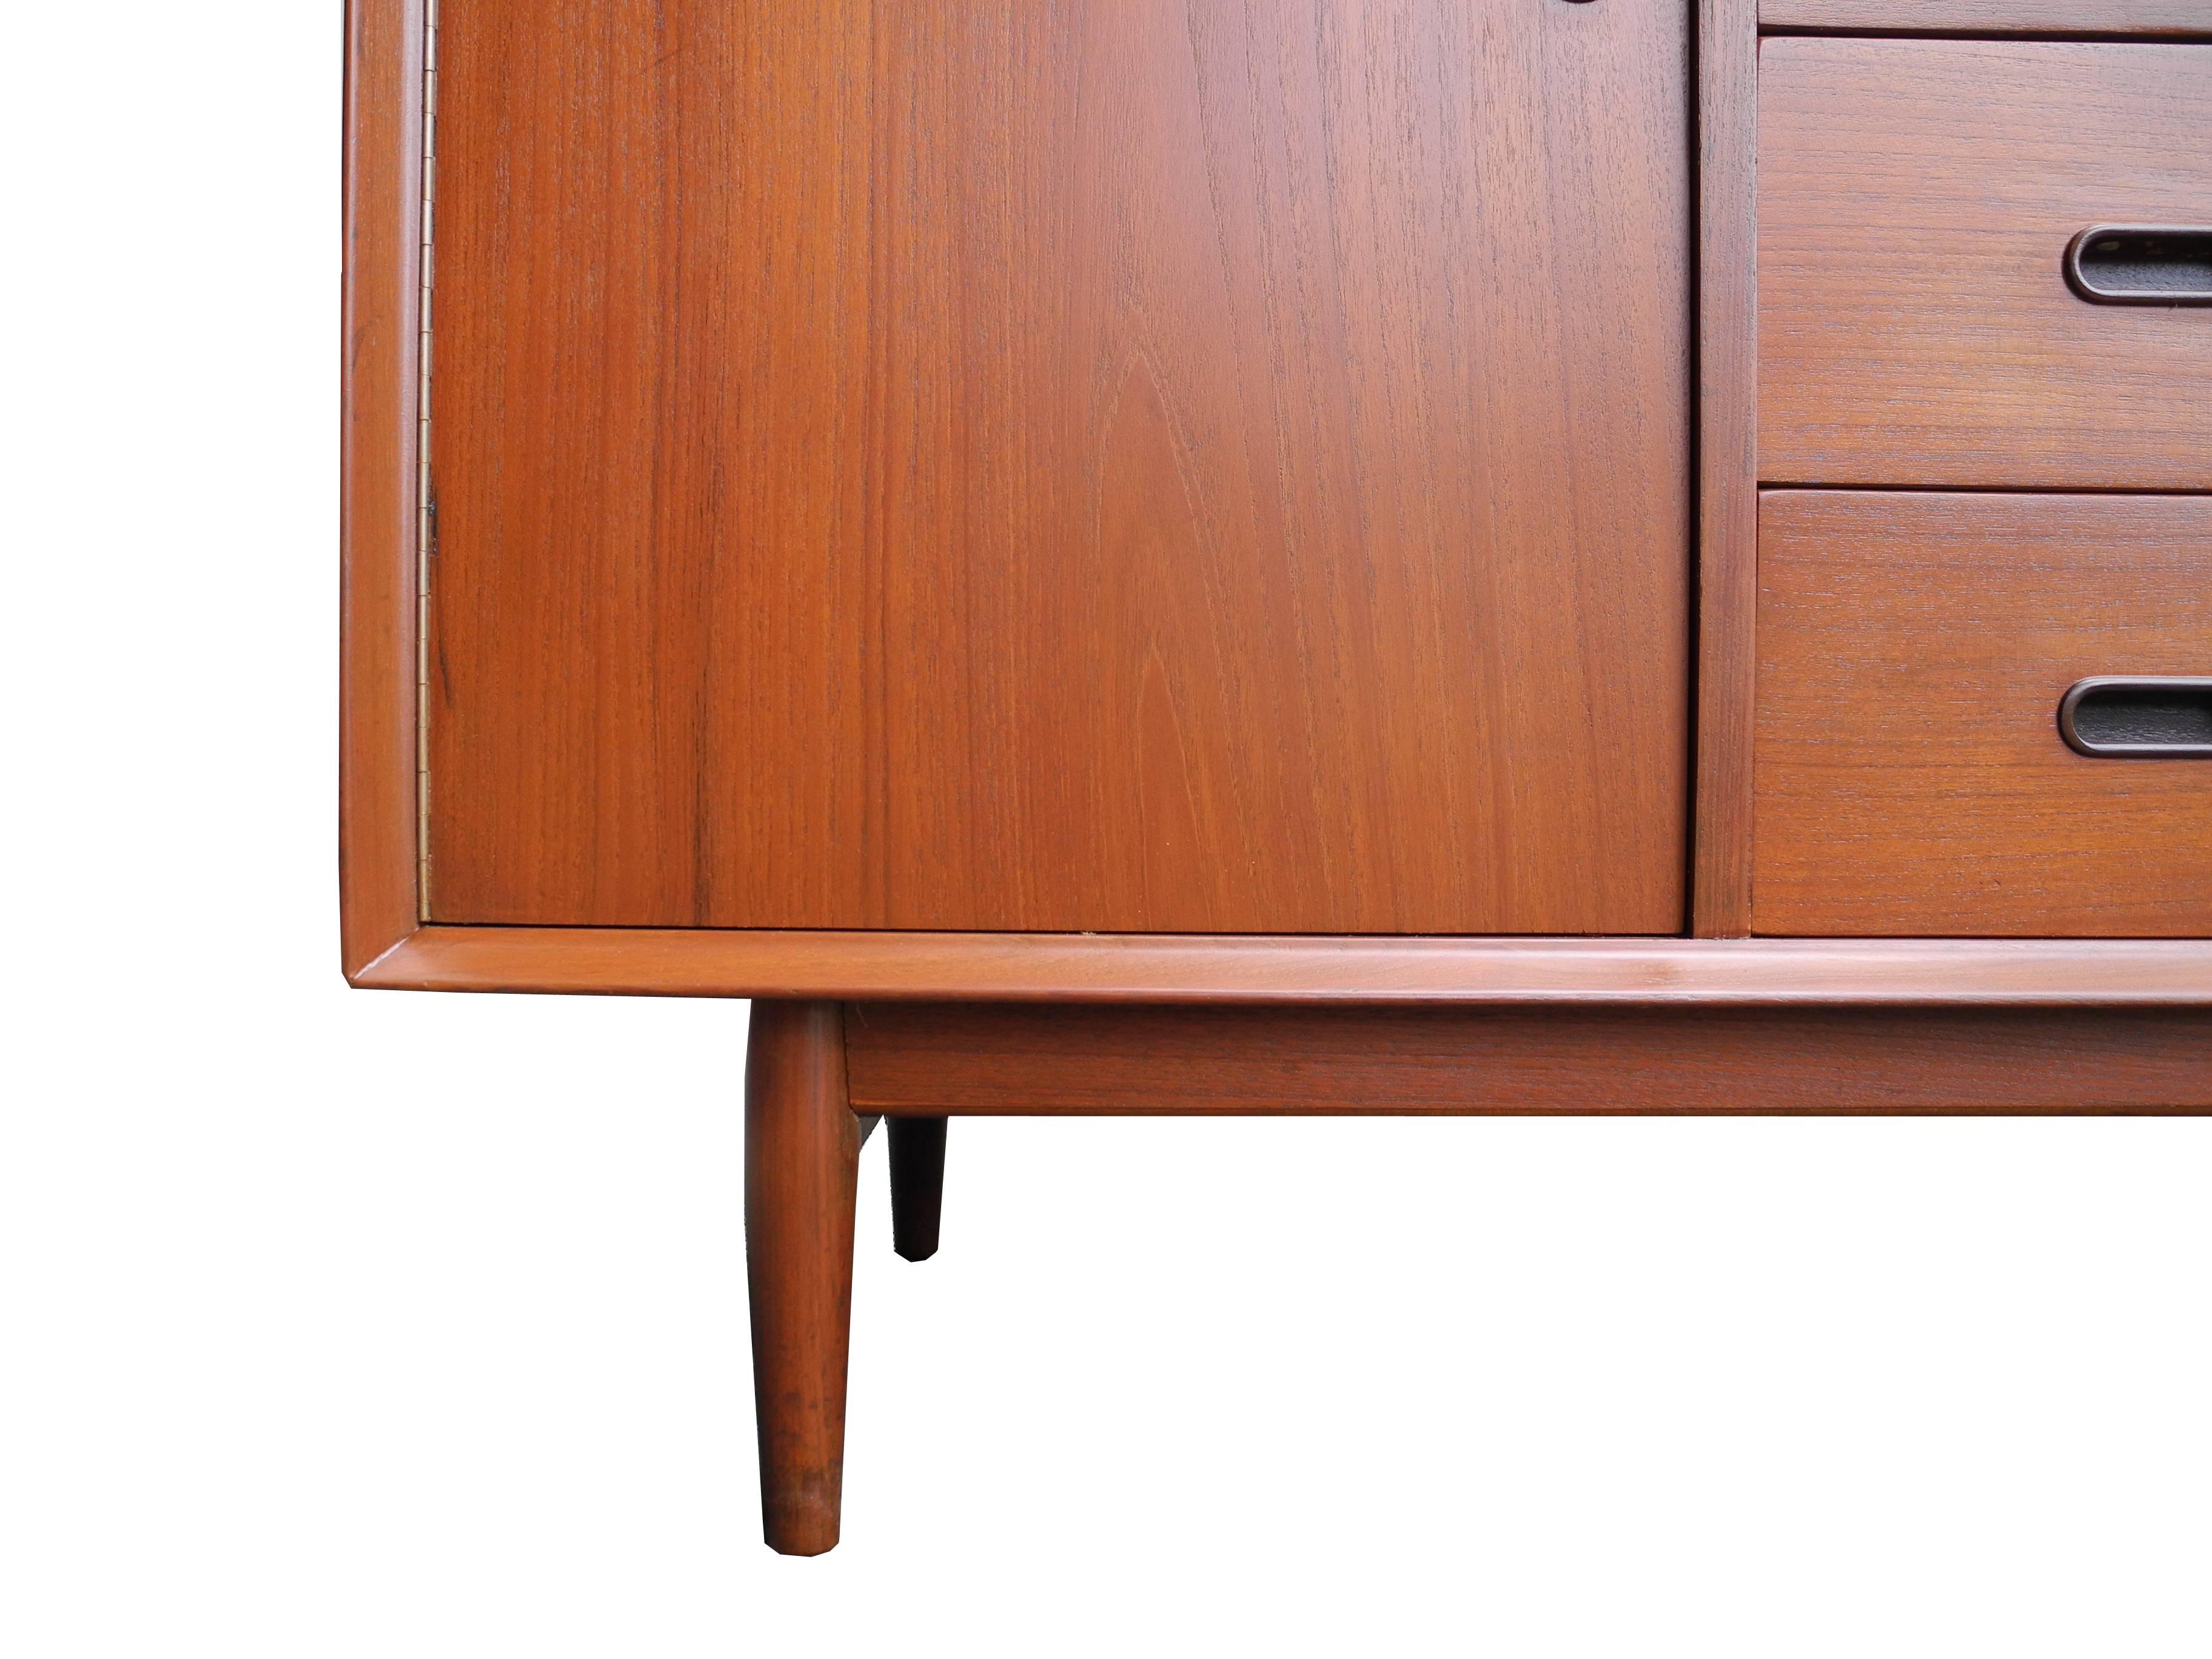 20th Century Danish Mid-Century Modern Teak, Drawers and Cabinet Sideboard by Arne Vodder For Sale